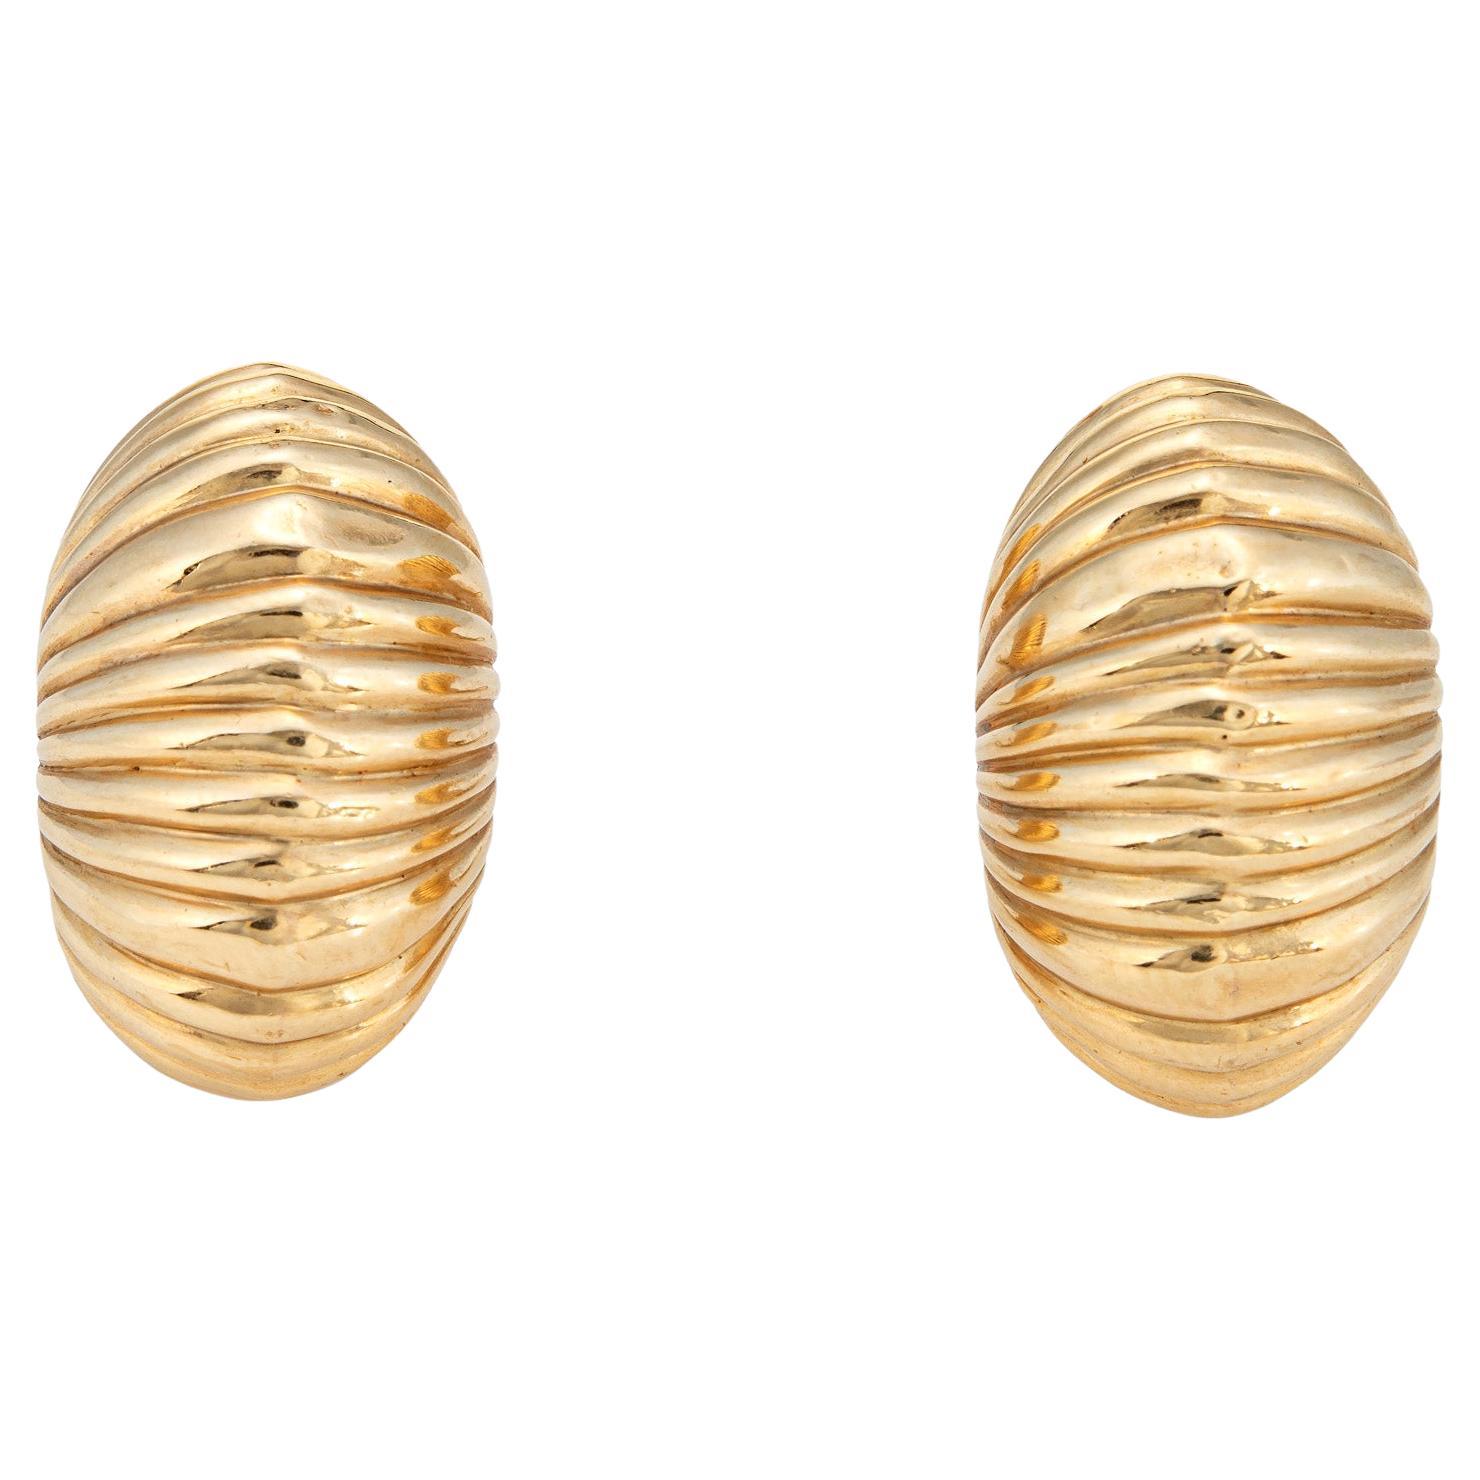 Vintage Cartier Earrings c1945 Bombe Fluted Dome 14k Gold Shell Fine Jewelry